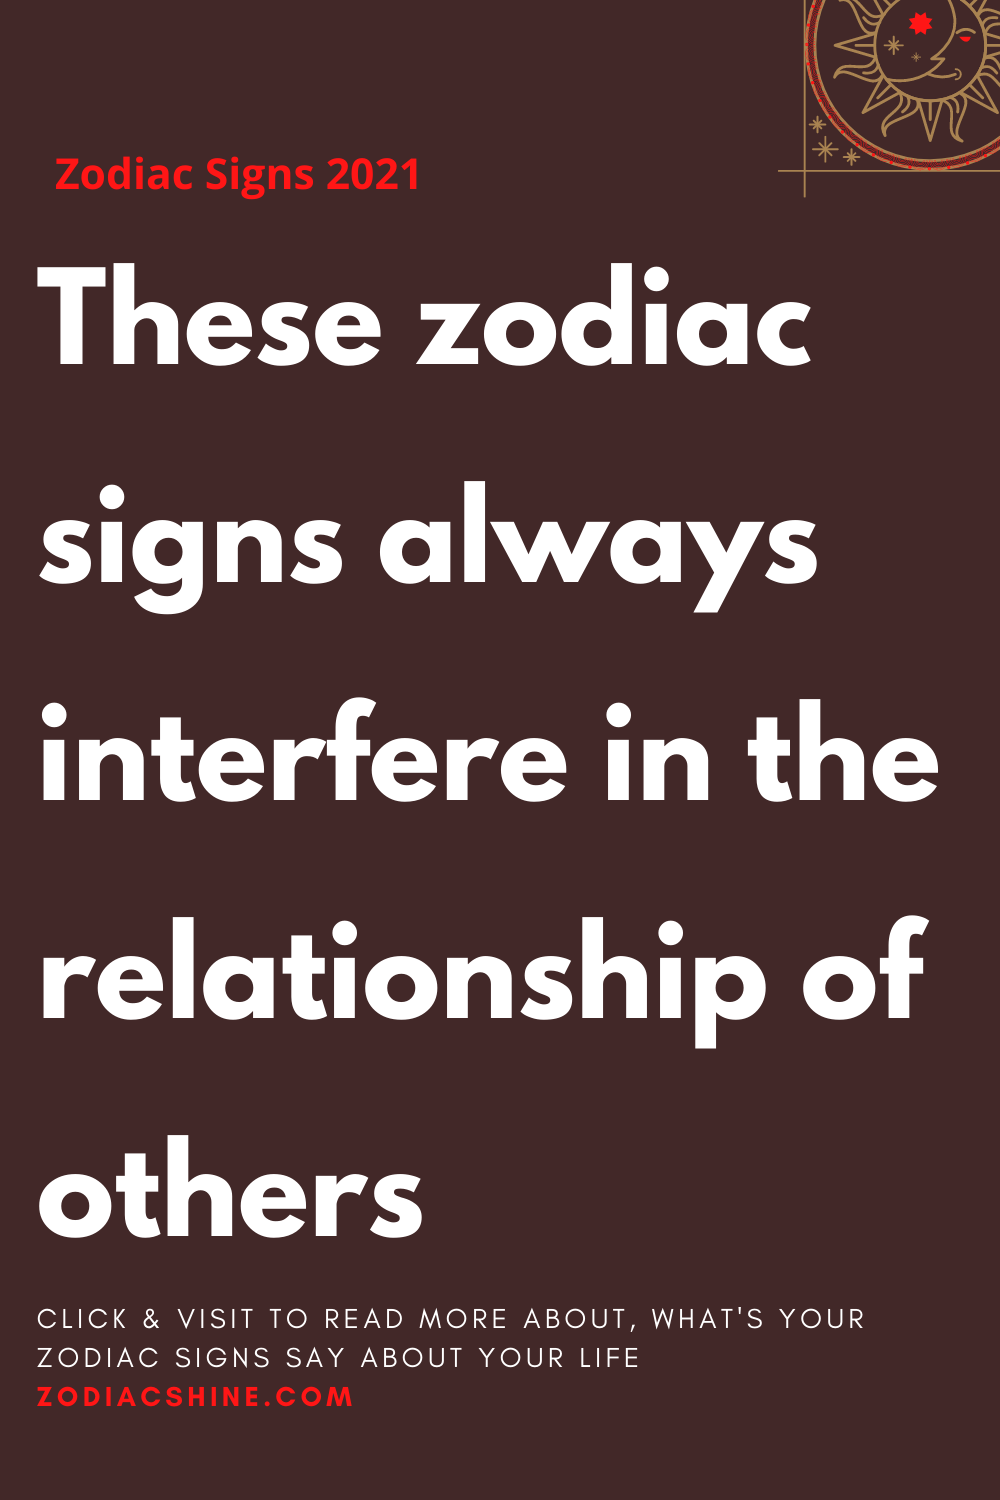 These zodiac signs always interfere in the relationship of others